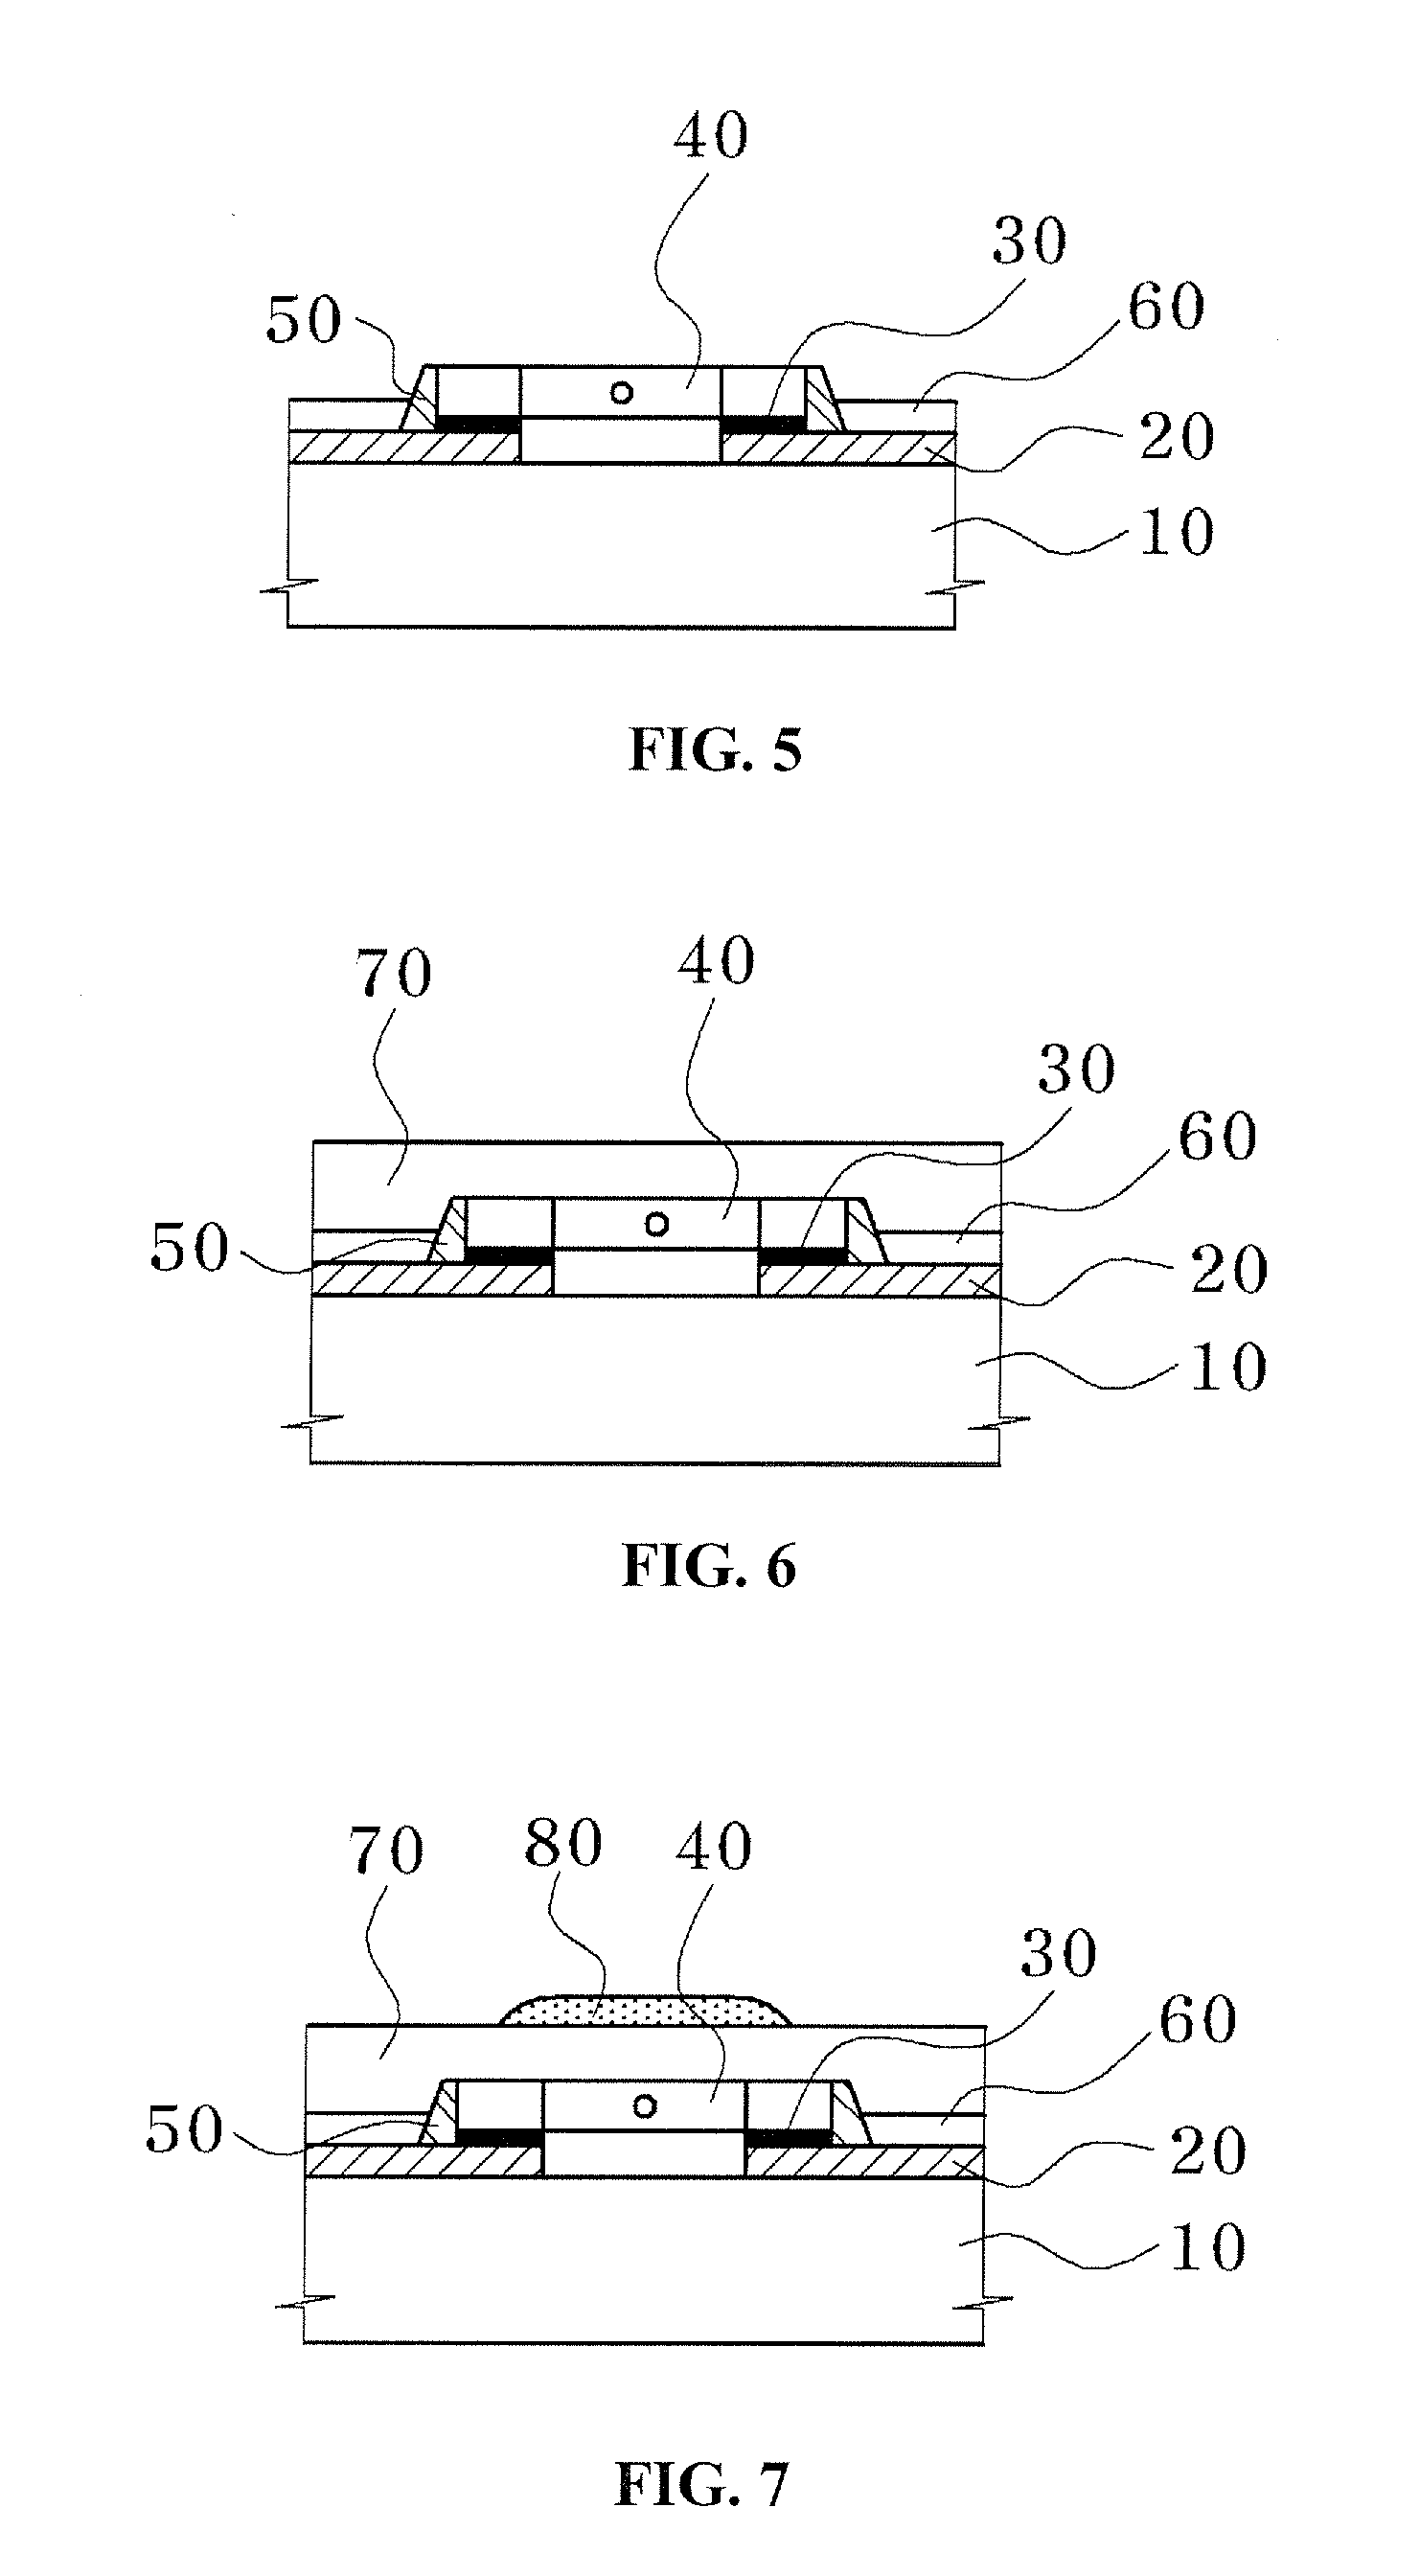 Method of manufacturing color printed circuit board